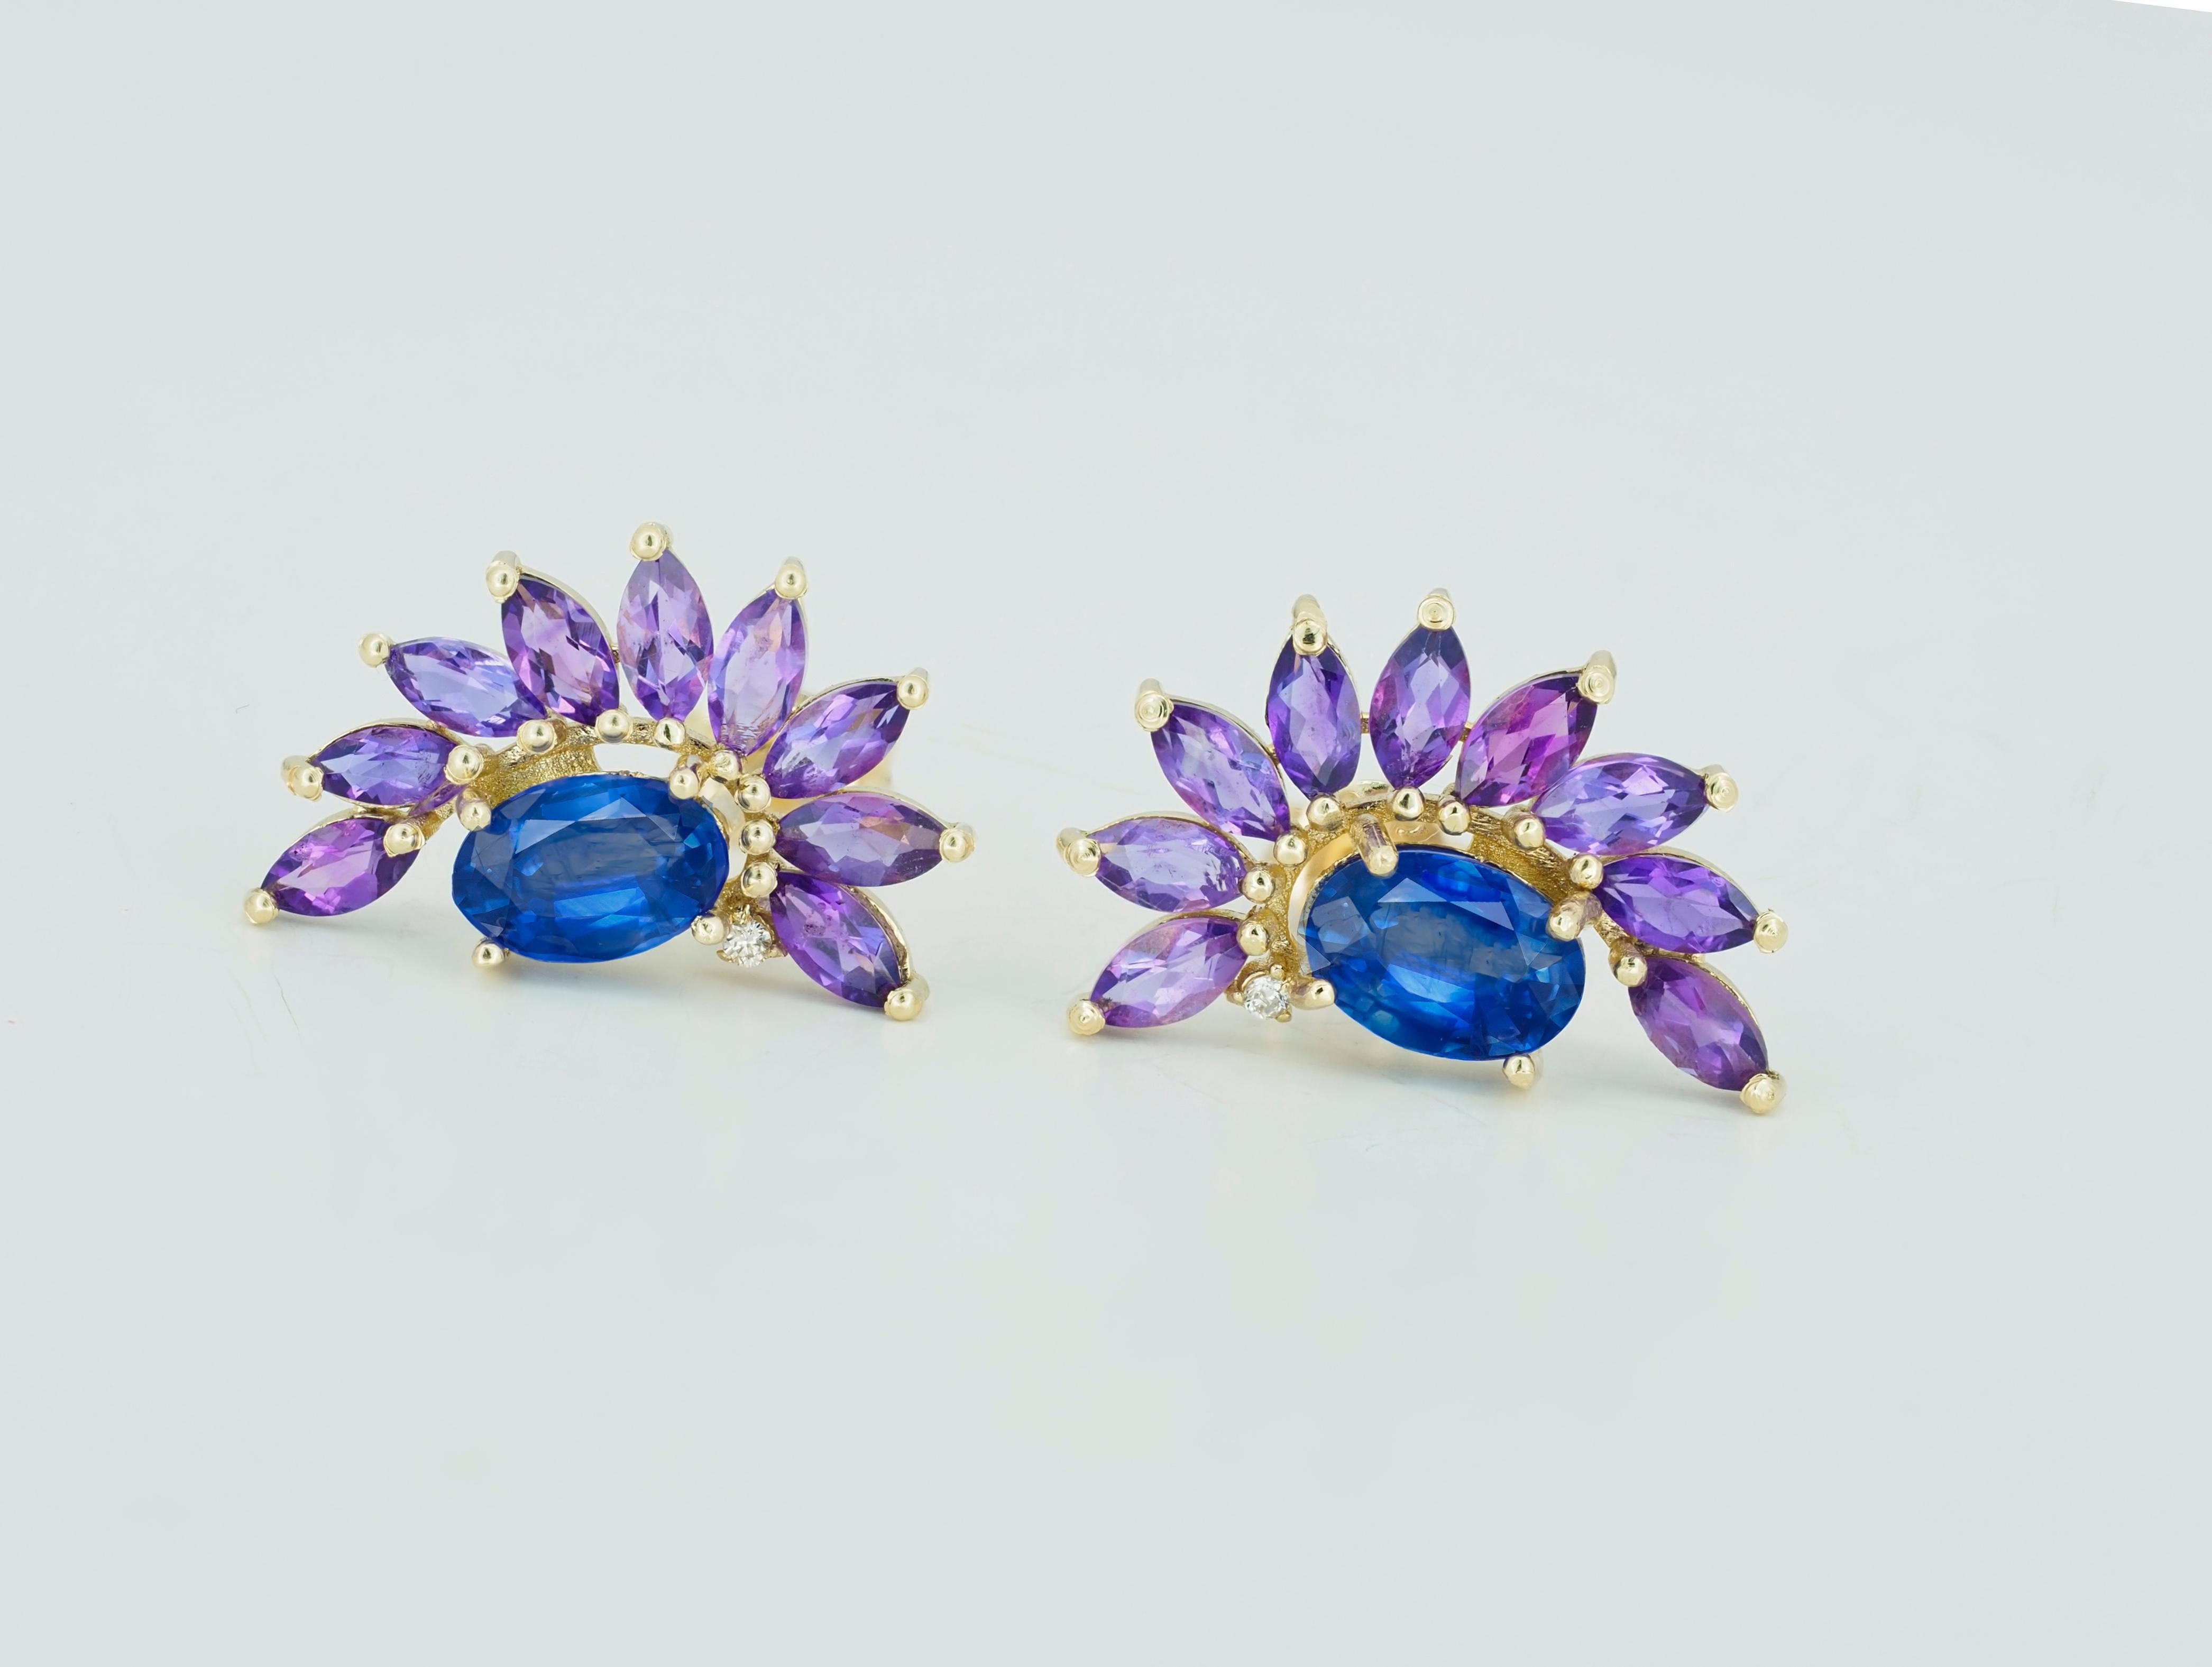 Sapphire 14k gold earrings studs. Amethyst earrings studs in 14k gold. Sapphire and amethyst in 14k gold earrings studs. 

Material: 14k gold.
Weight: 2.3 gr.
Size Earrings: 10x16.6mm
Central stones: Natural Sapphire - 2 pieces 
Cut: Oval
Weight: